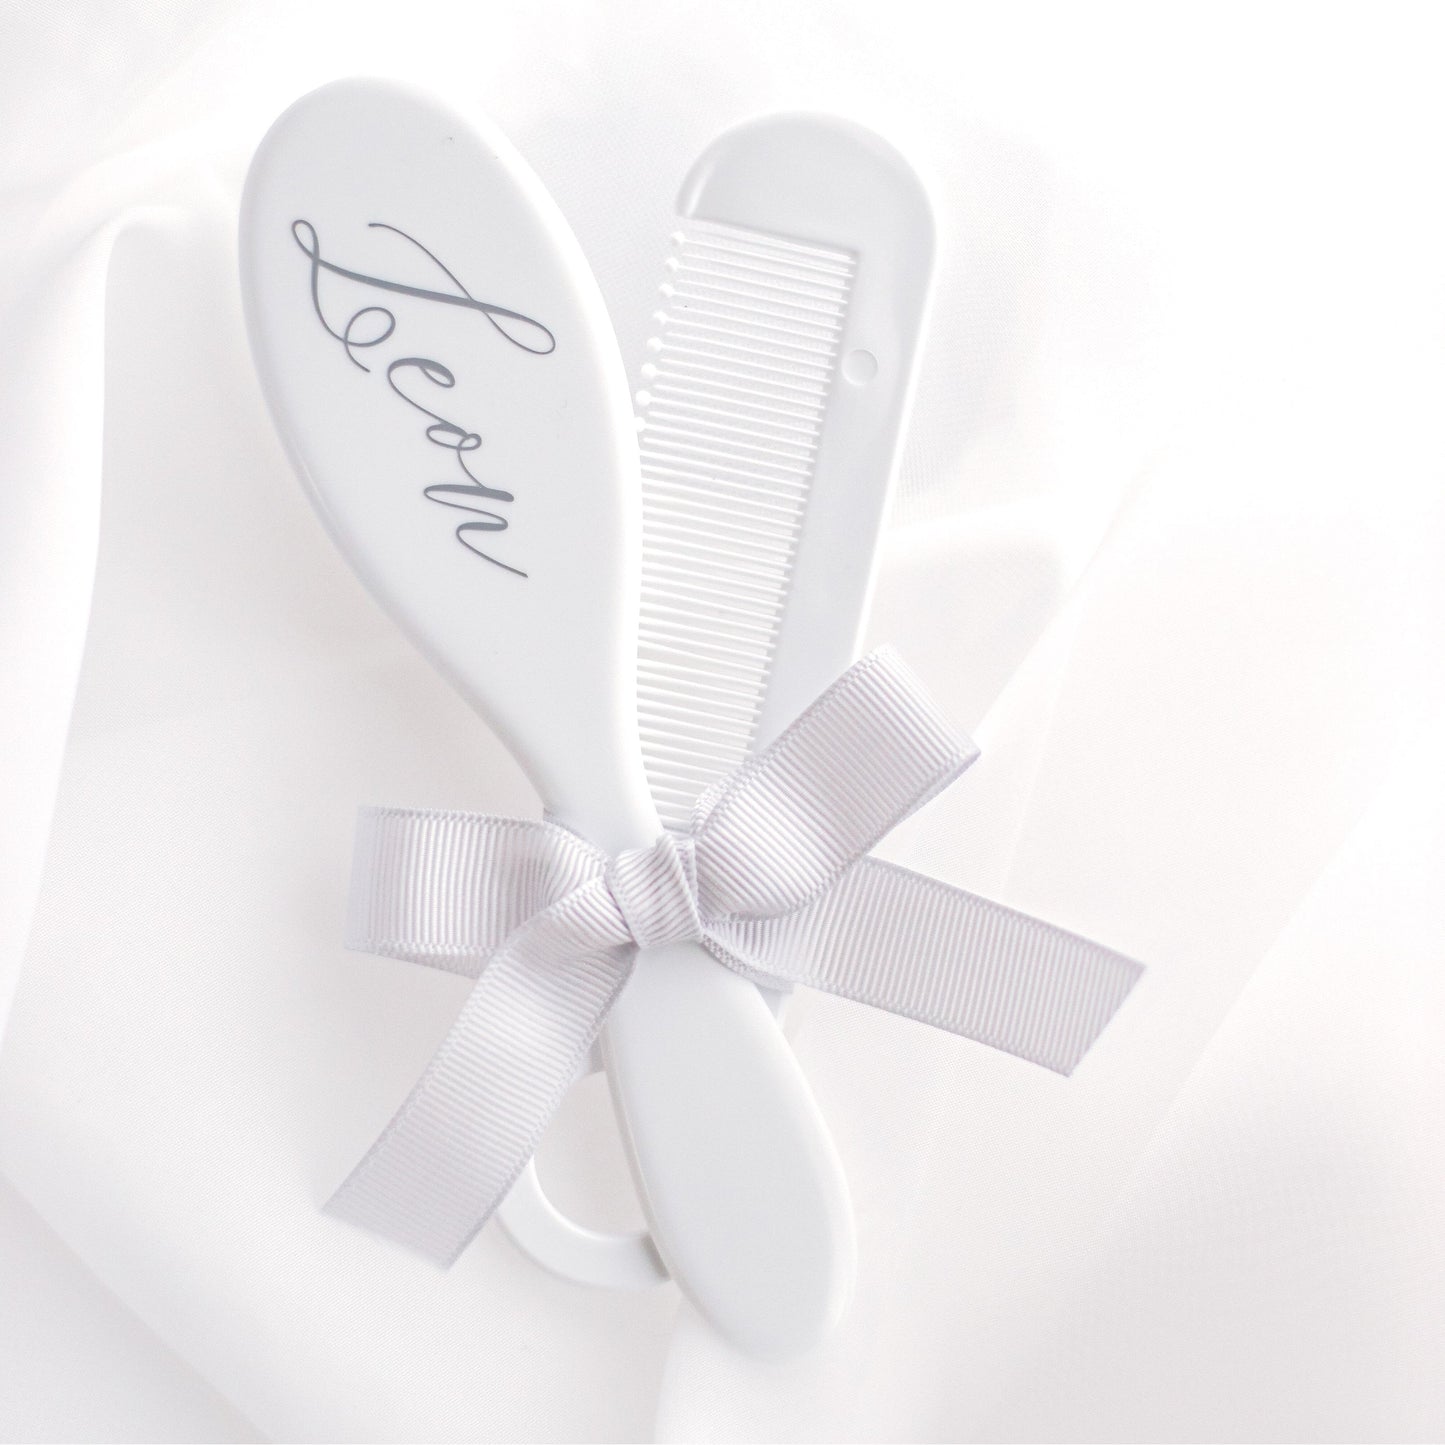 White Personalised Brush & Comb Set - The brush can personalised on the back with the child's name or initials. The brush is intended for babies and has soft bristles.